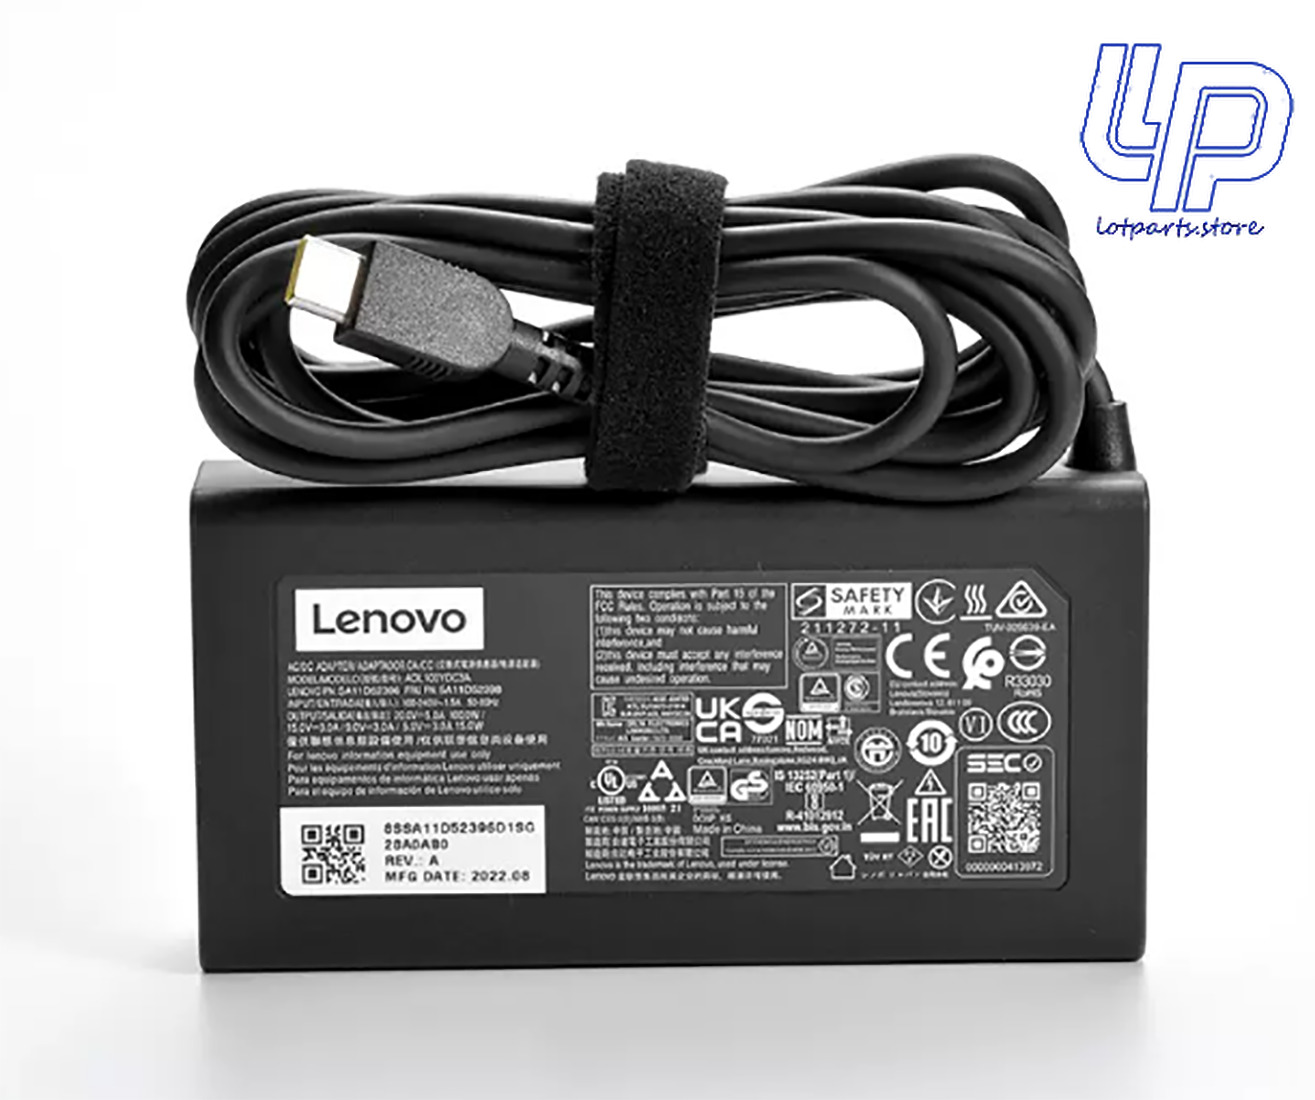 NEW Geunine Lenovo 100W 20V 5A USB-C Charger AC Adapter ADL100YDC3A 5A11D52398